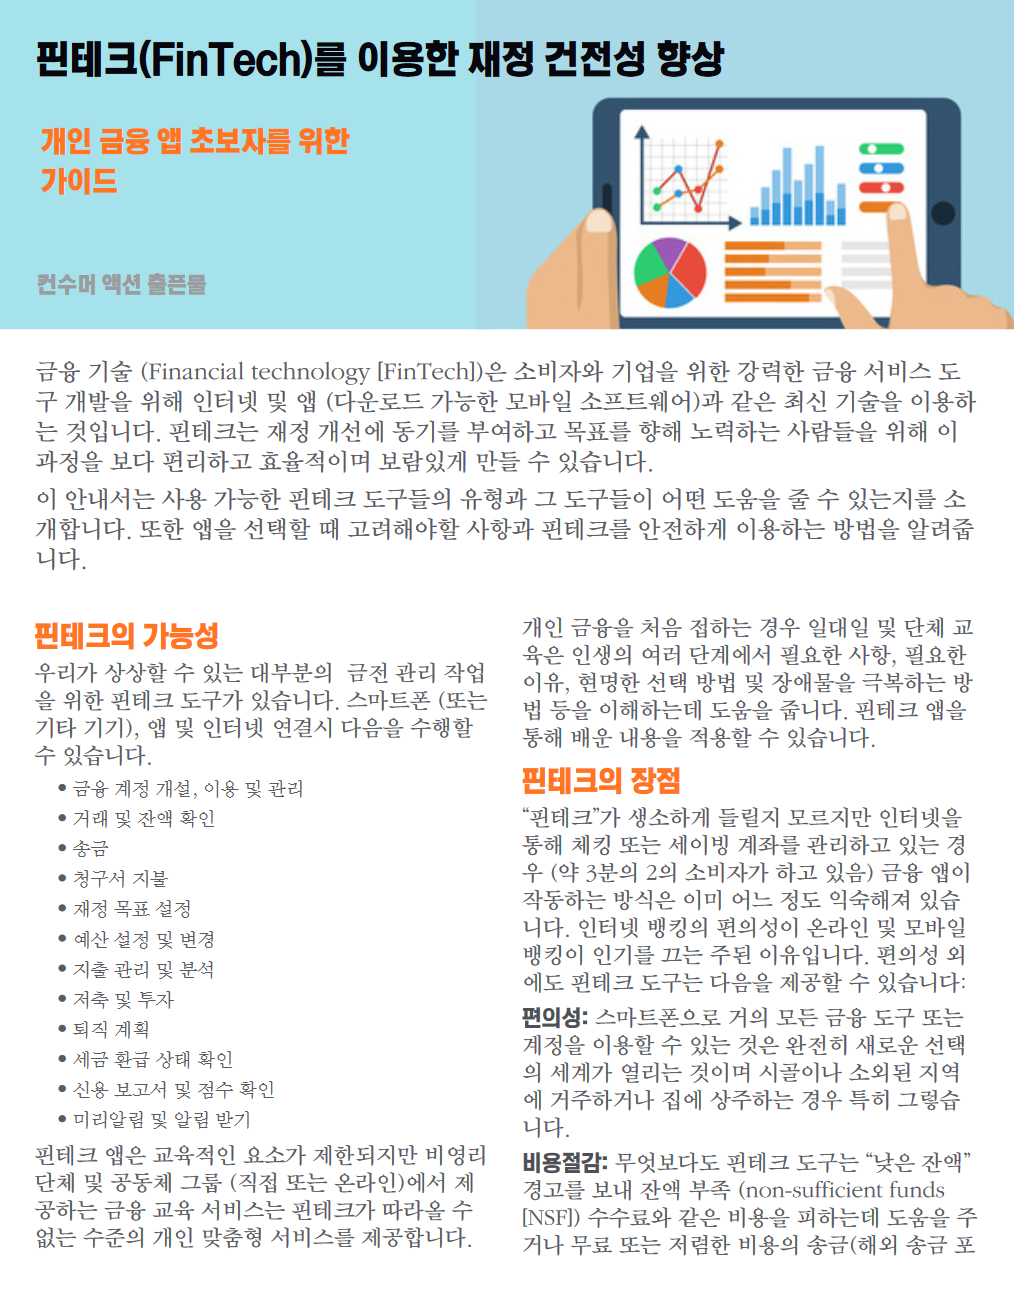 Improving your financial health with FinTech (Korean)